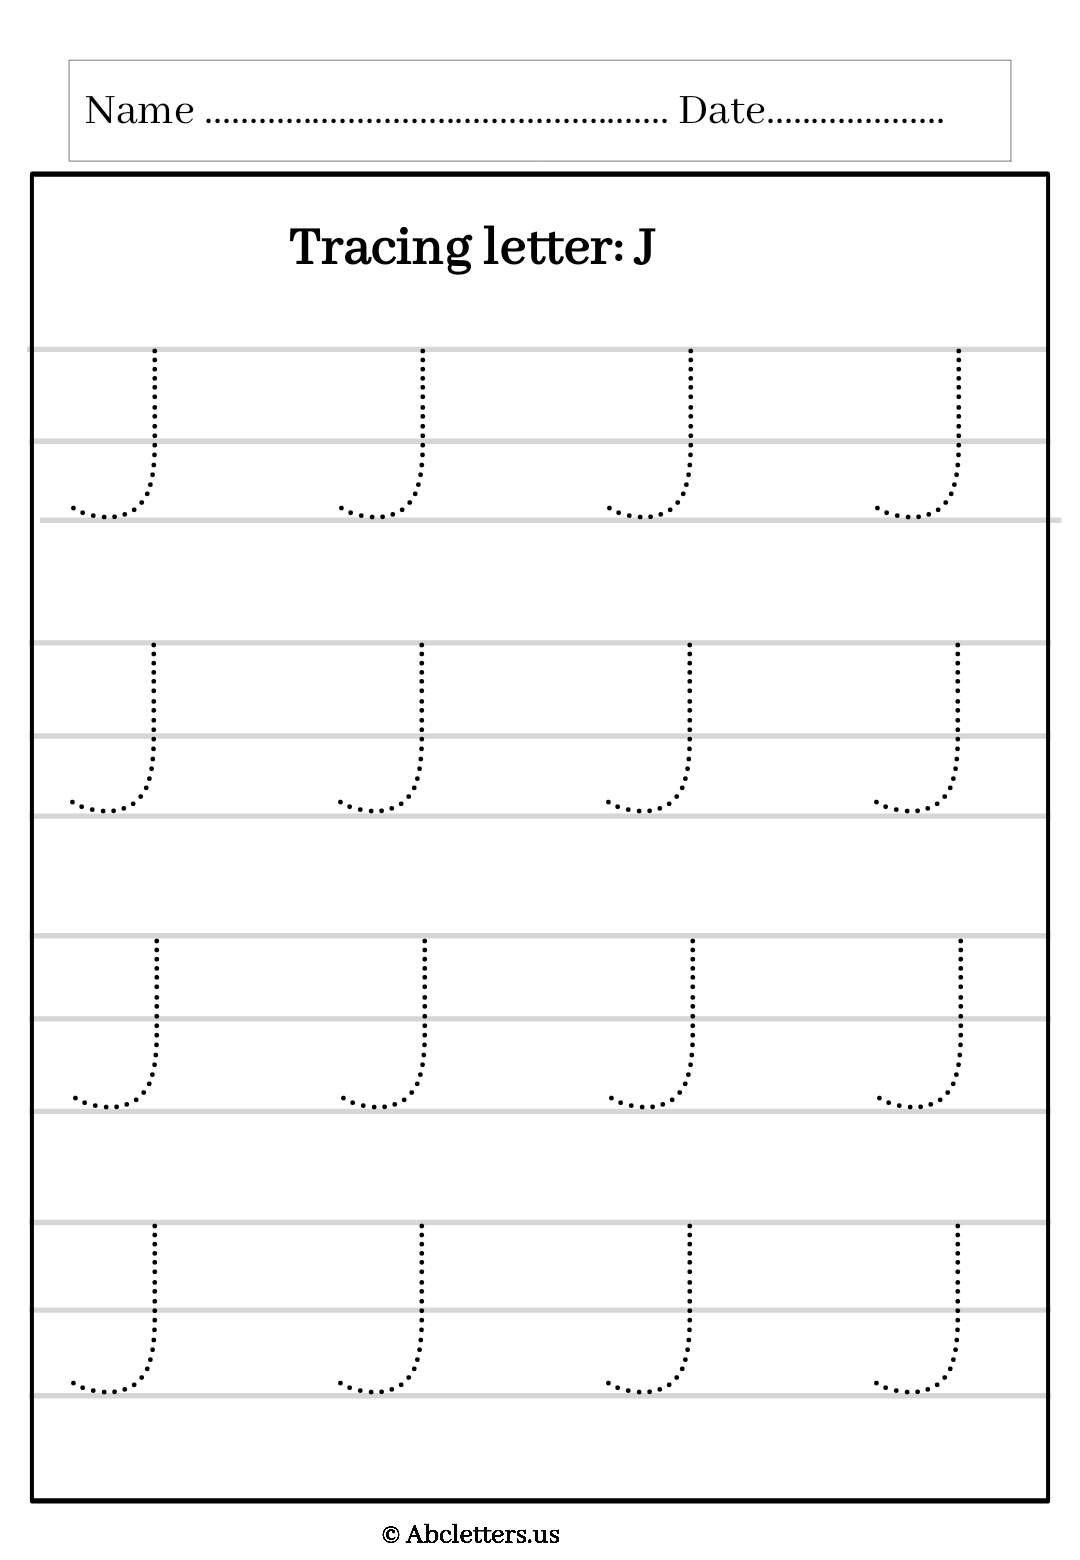 Tracing letter J uppercase with 3 lines